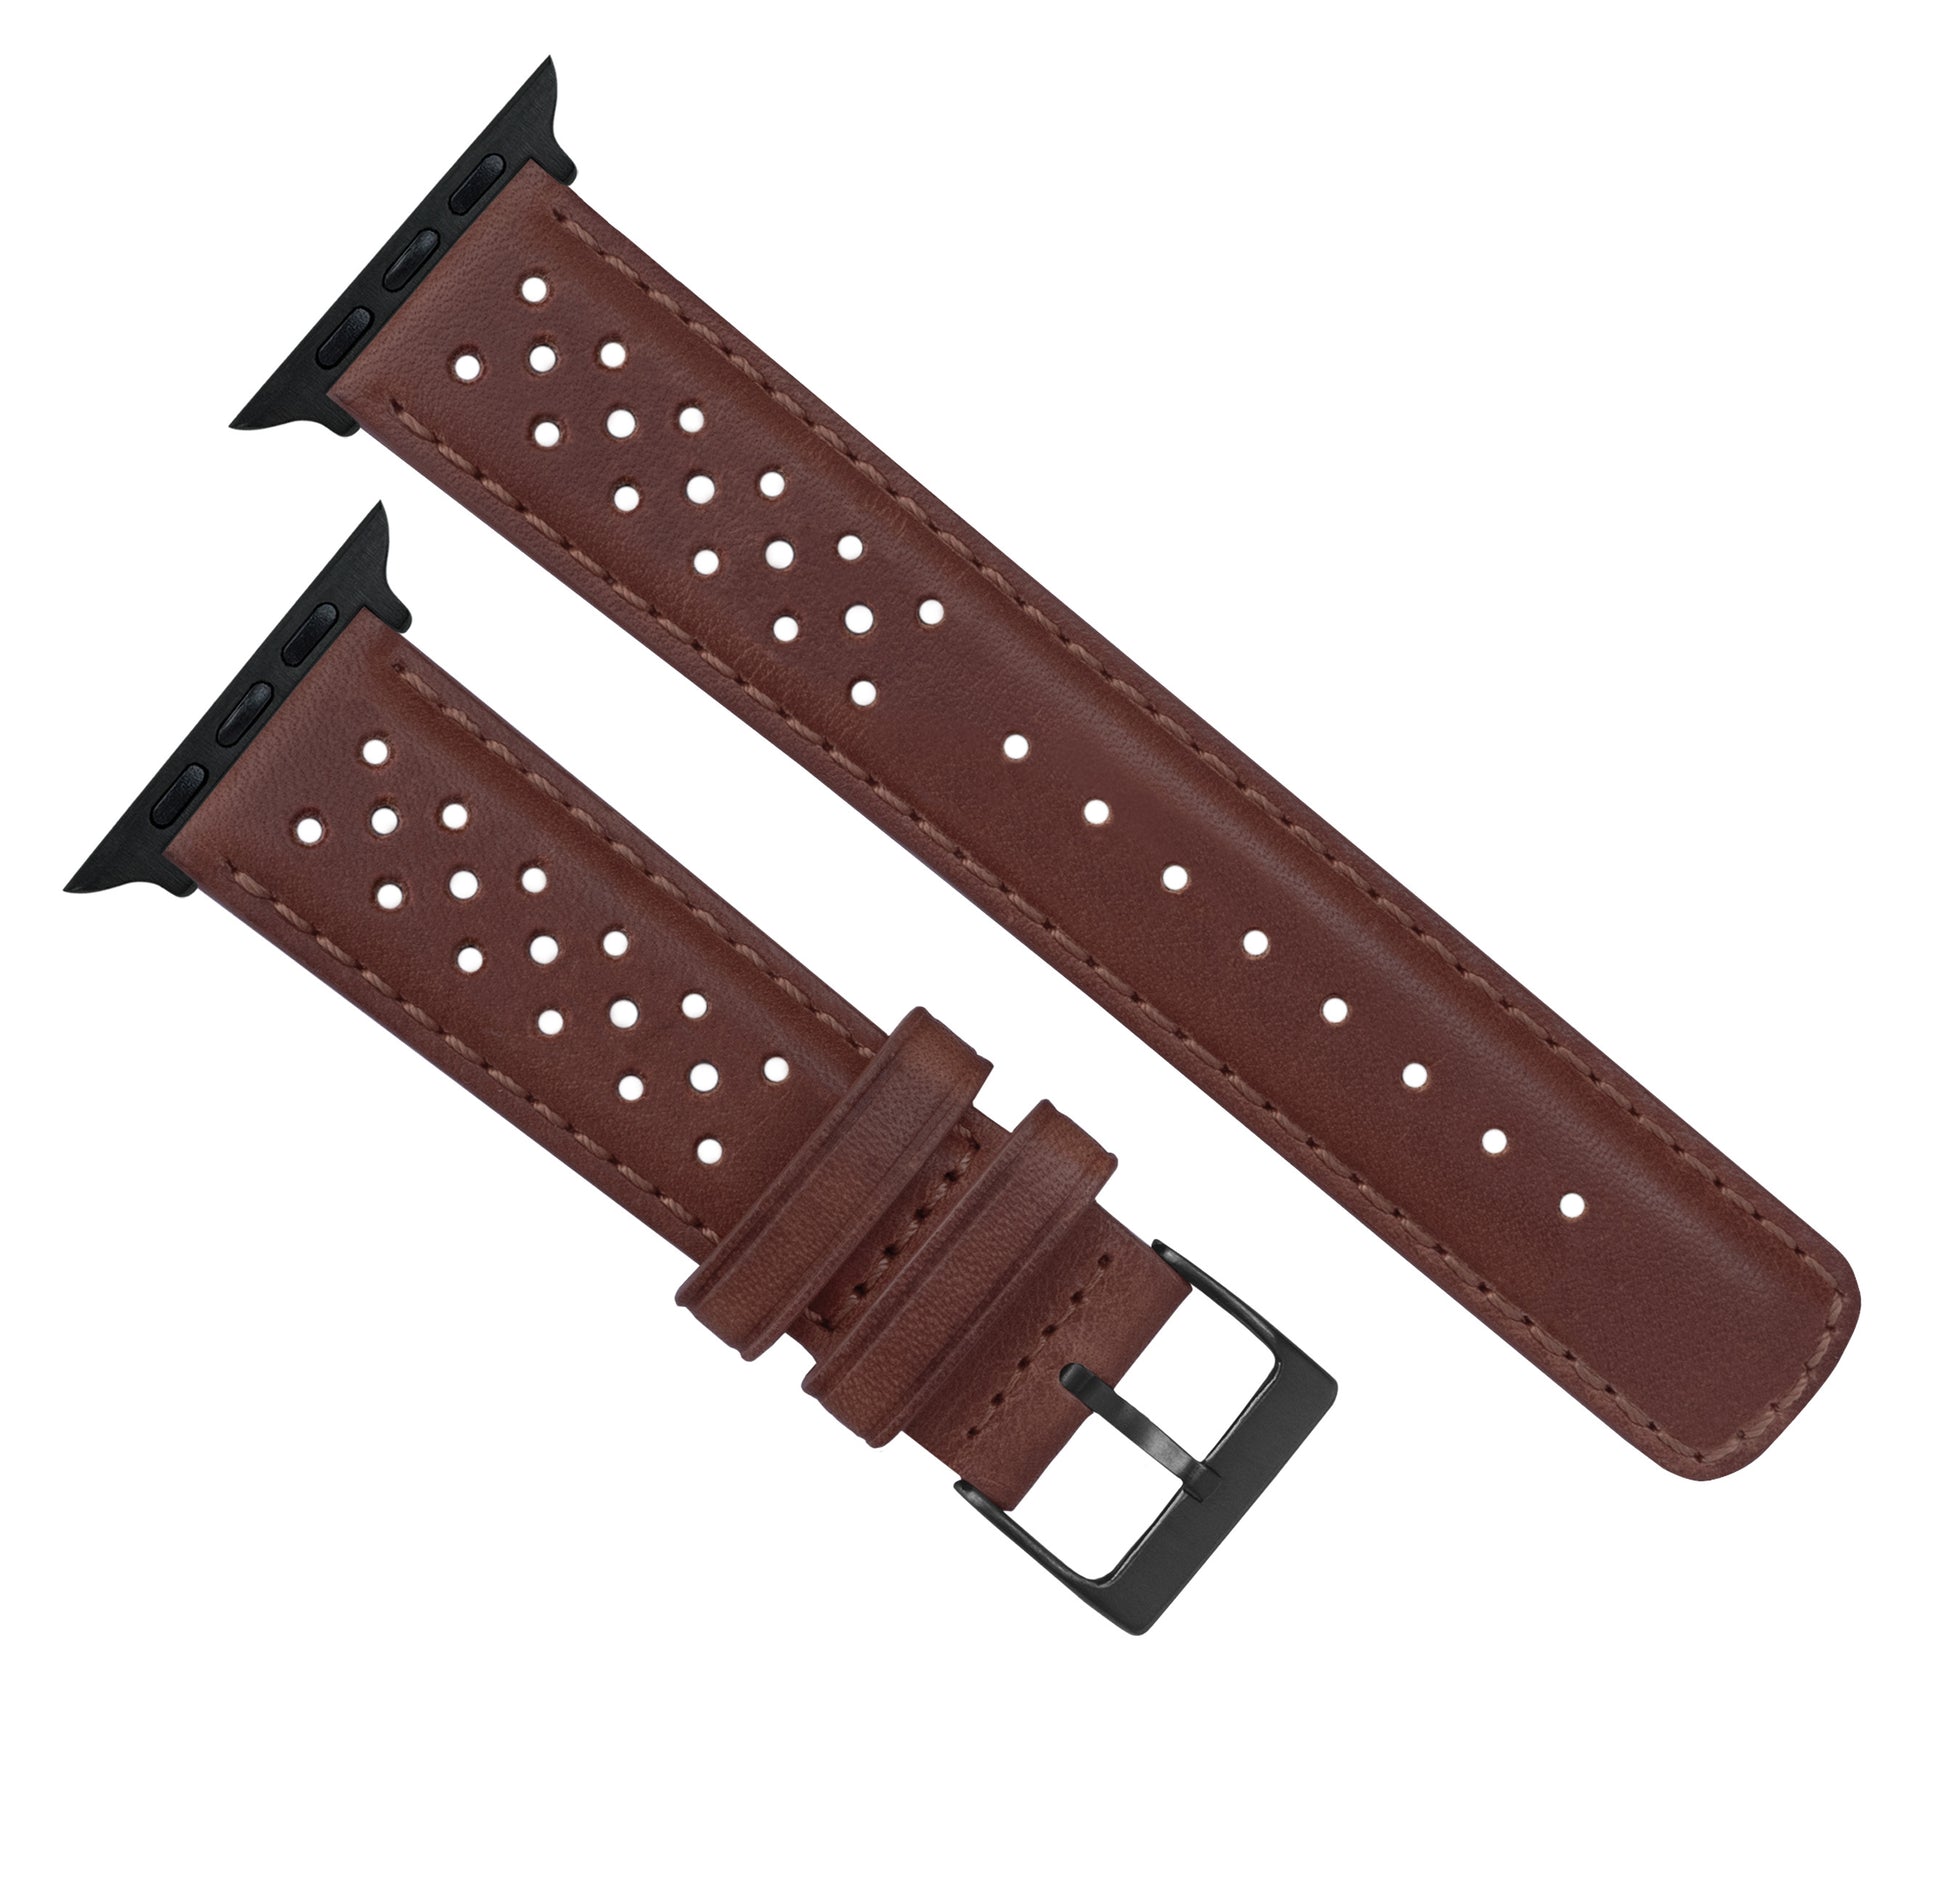 Apple Watch | Chocolate Brown Racing Horween Leather - Barton Watch Bands